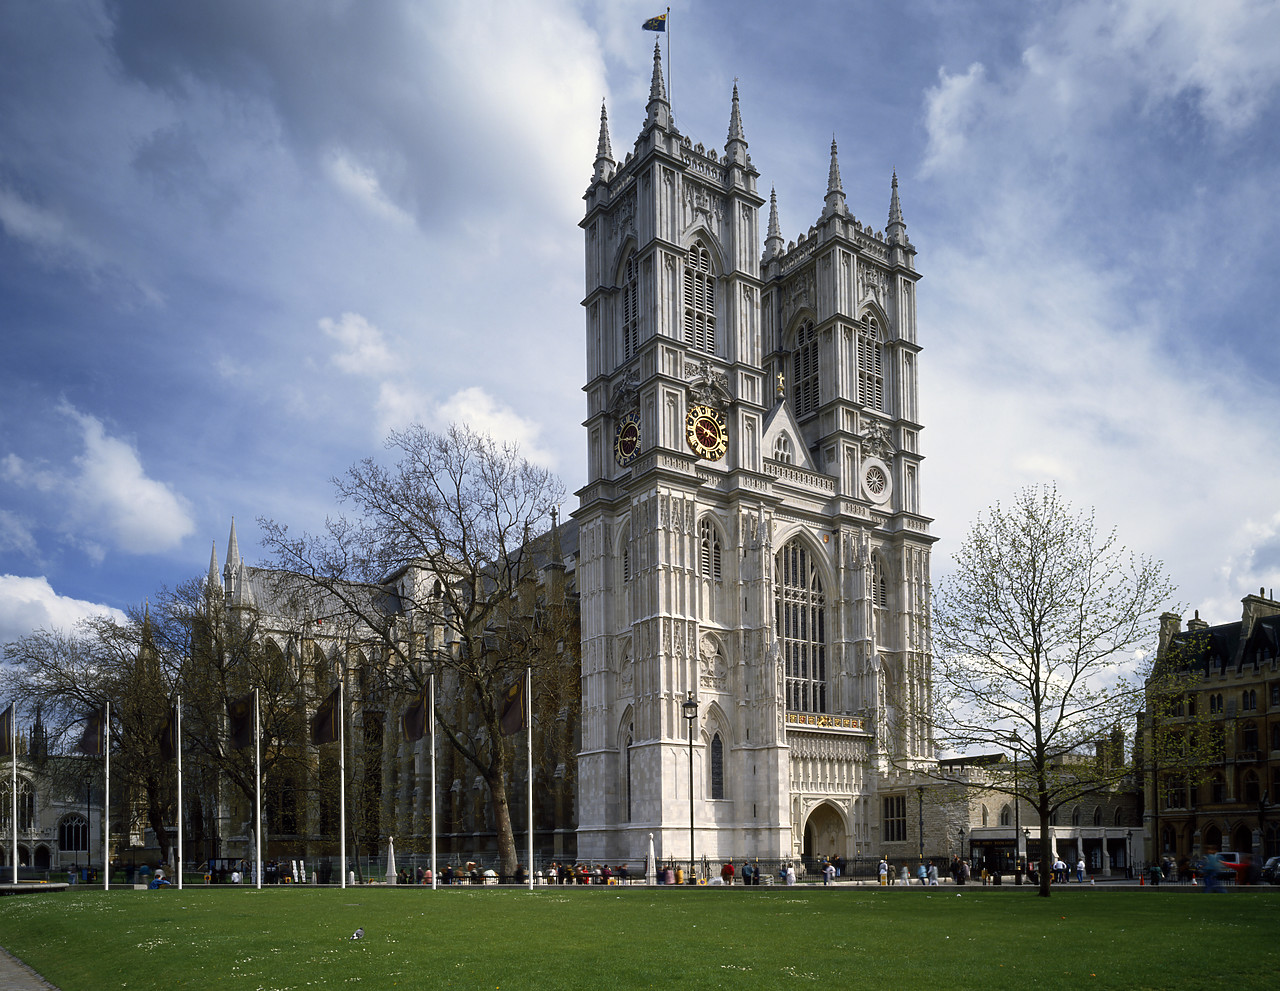 #944558-1 - Westminster Abbey, London, England